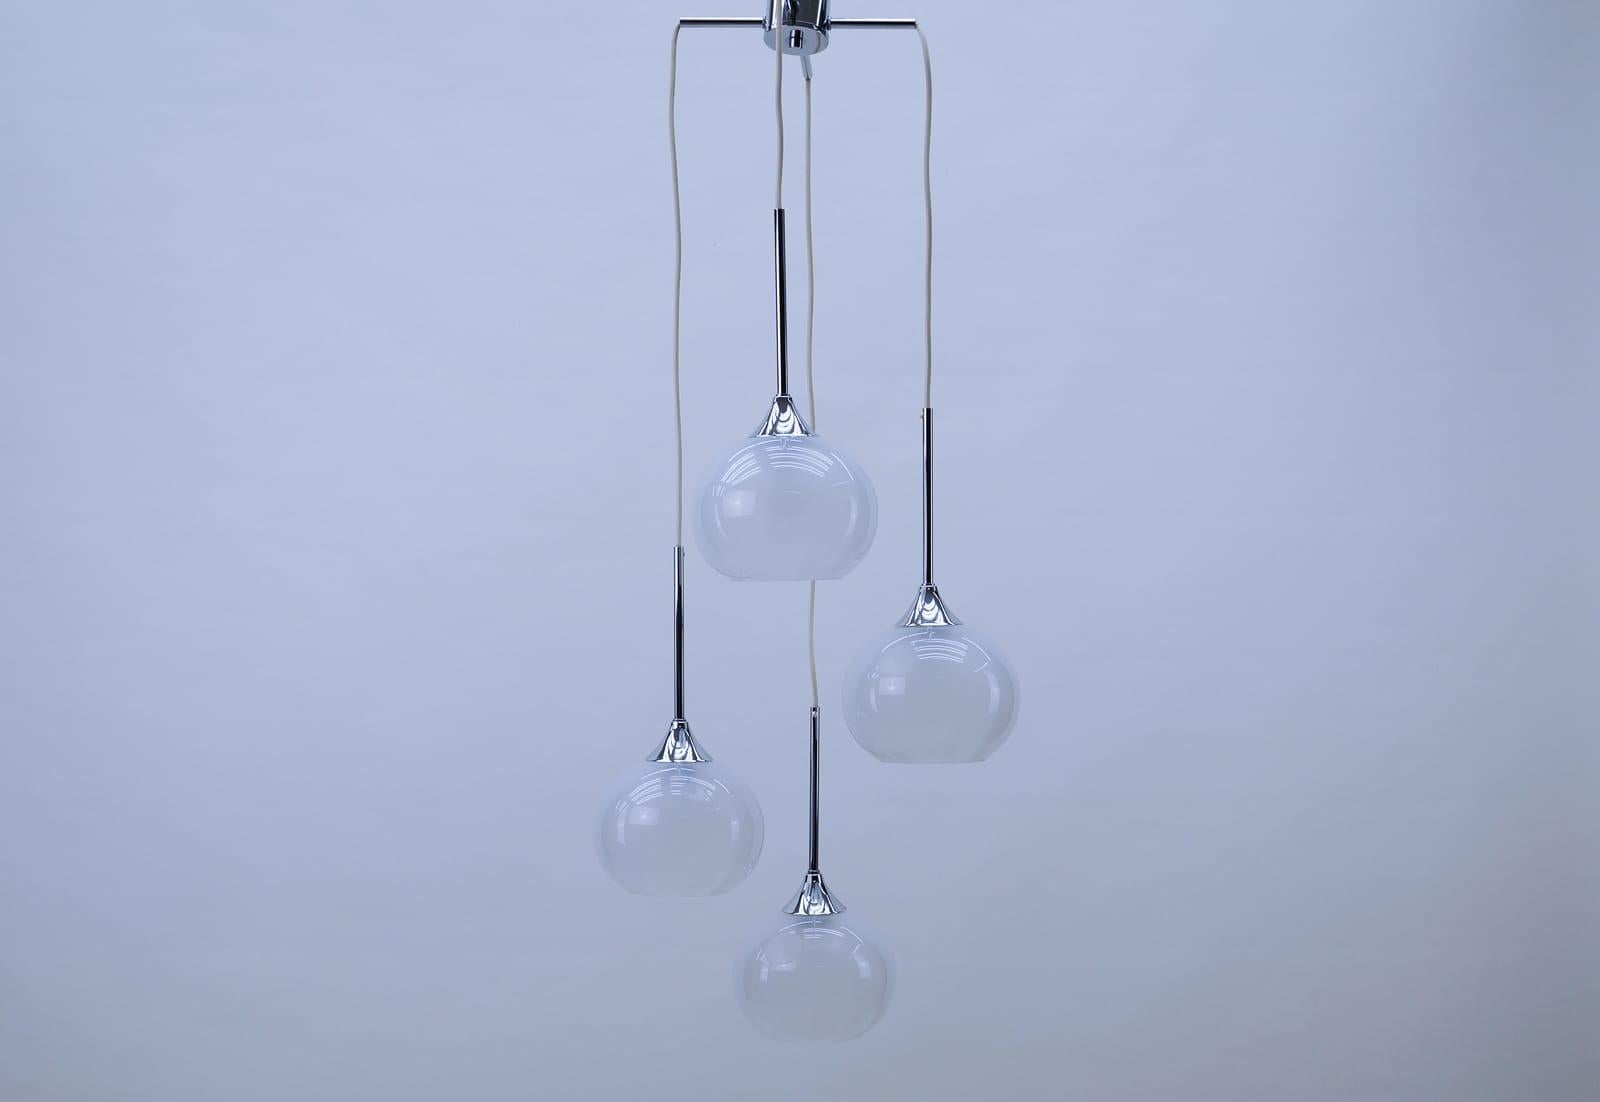 This ceiling lamp features a small frame with 4 cascading milk glass elements with E27 bulb sockets.

Fully functional.

Four E14 sockets. Works with 220V and 110V.

Wiring is suitable for all countries.